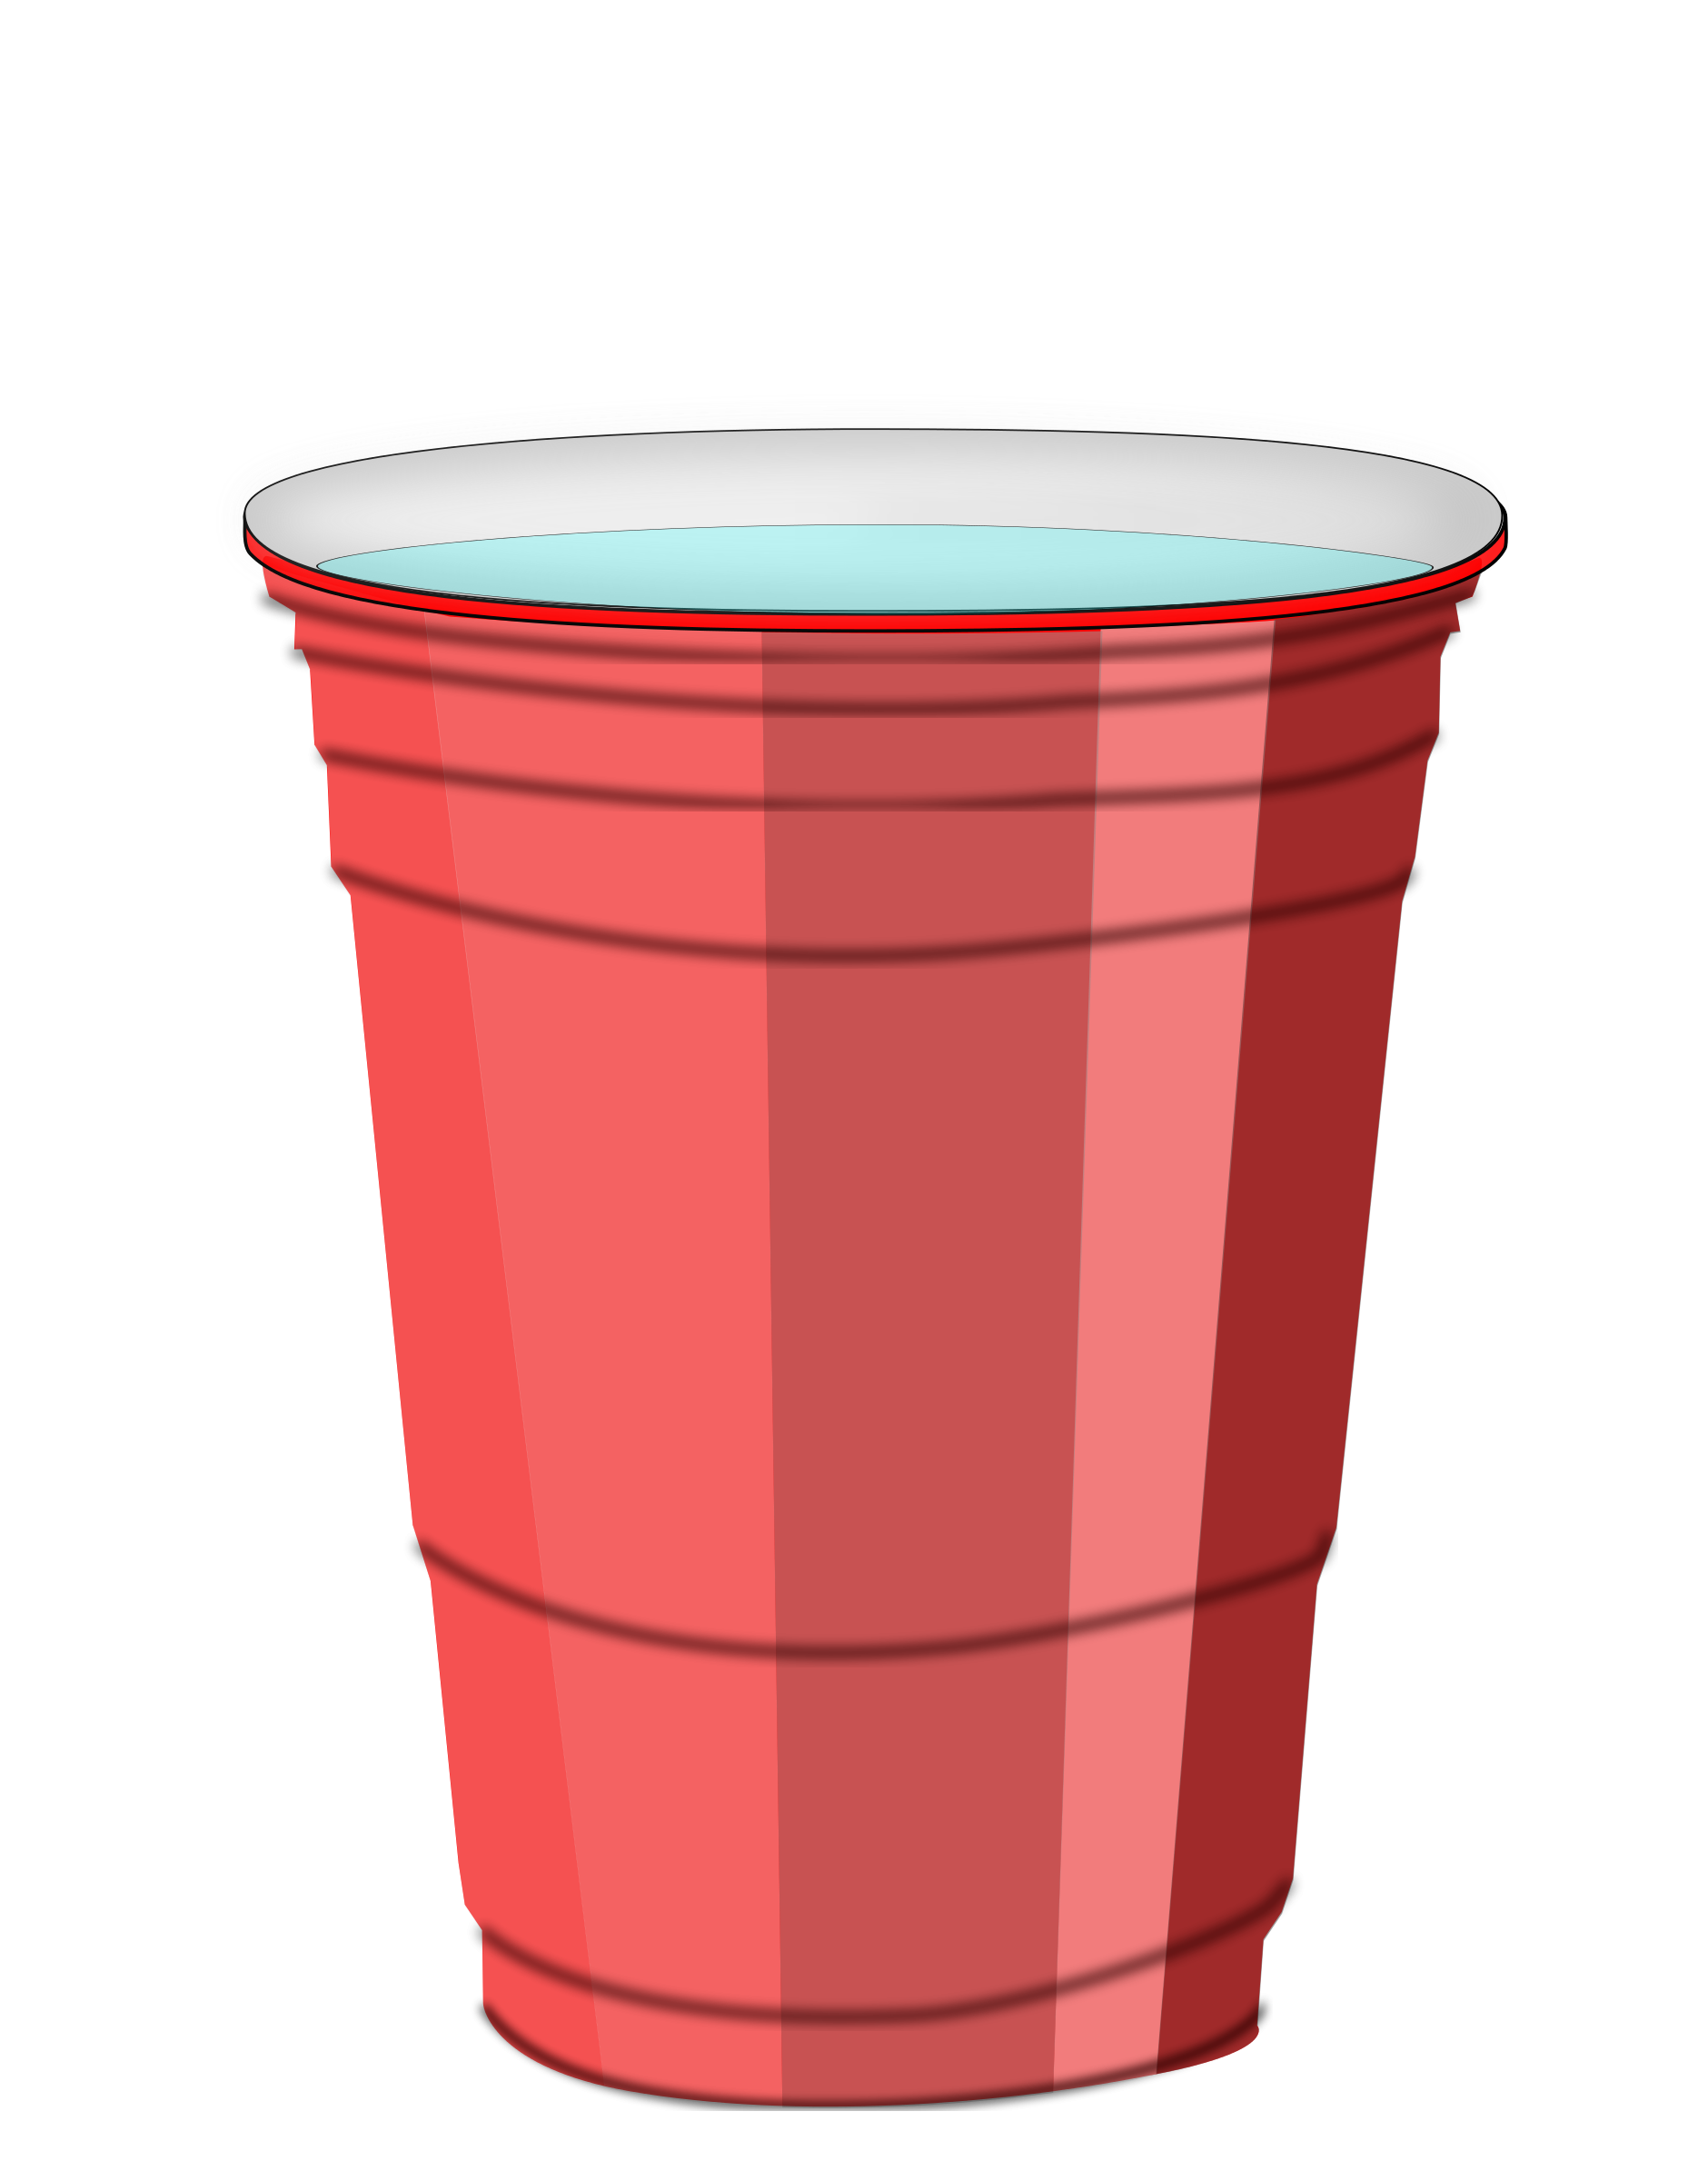 Red Solo Cup Clipart 